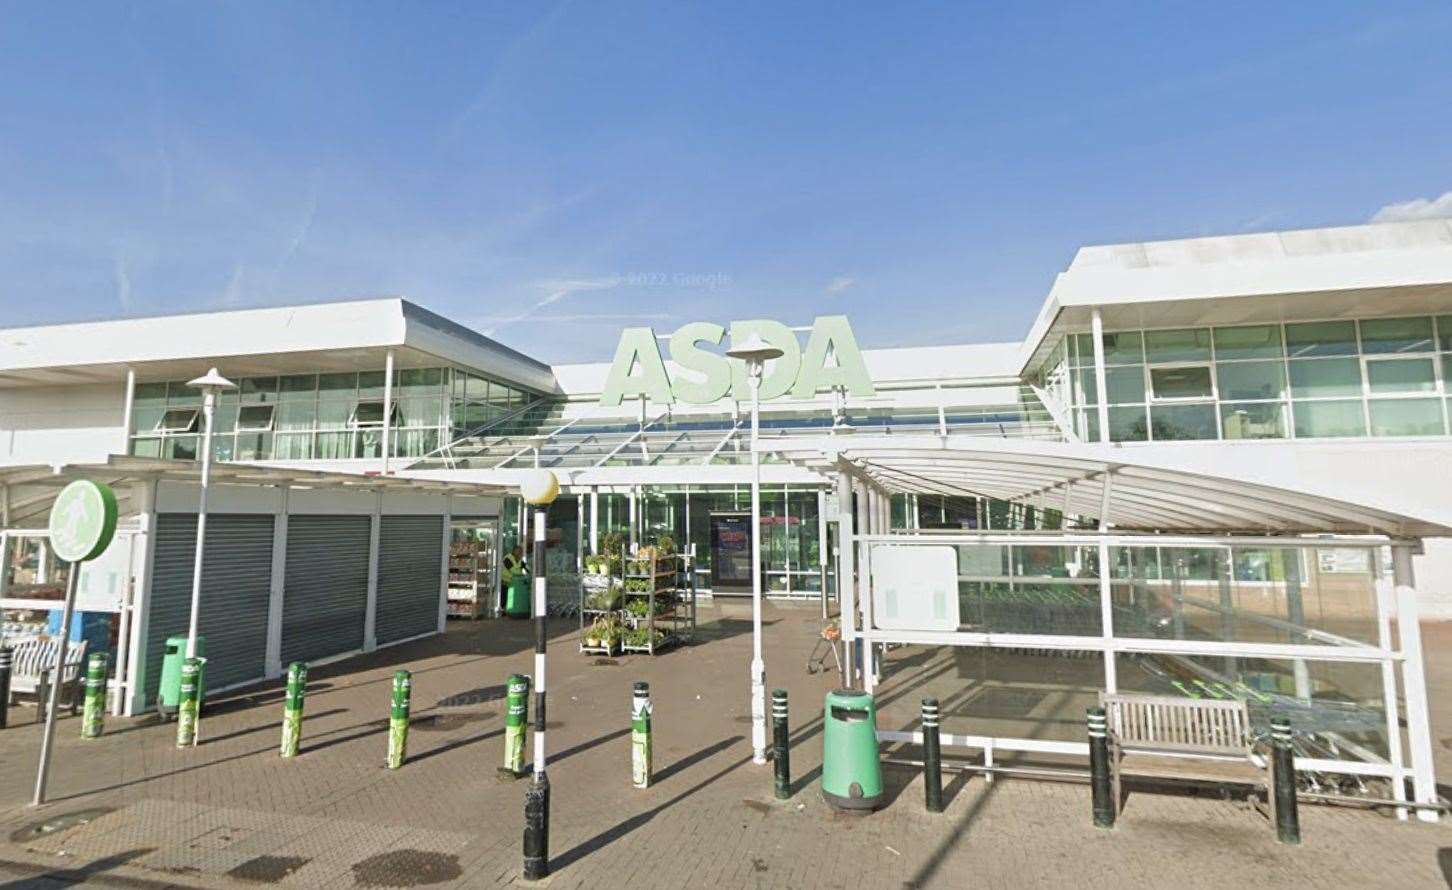 The Asda in Sturry Road, Canterbury. Picture: Google